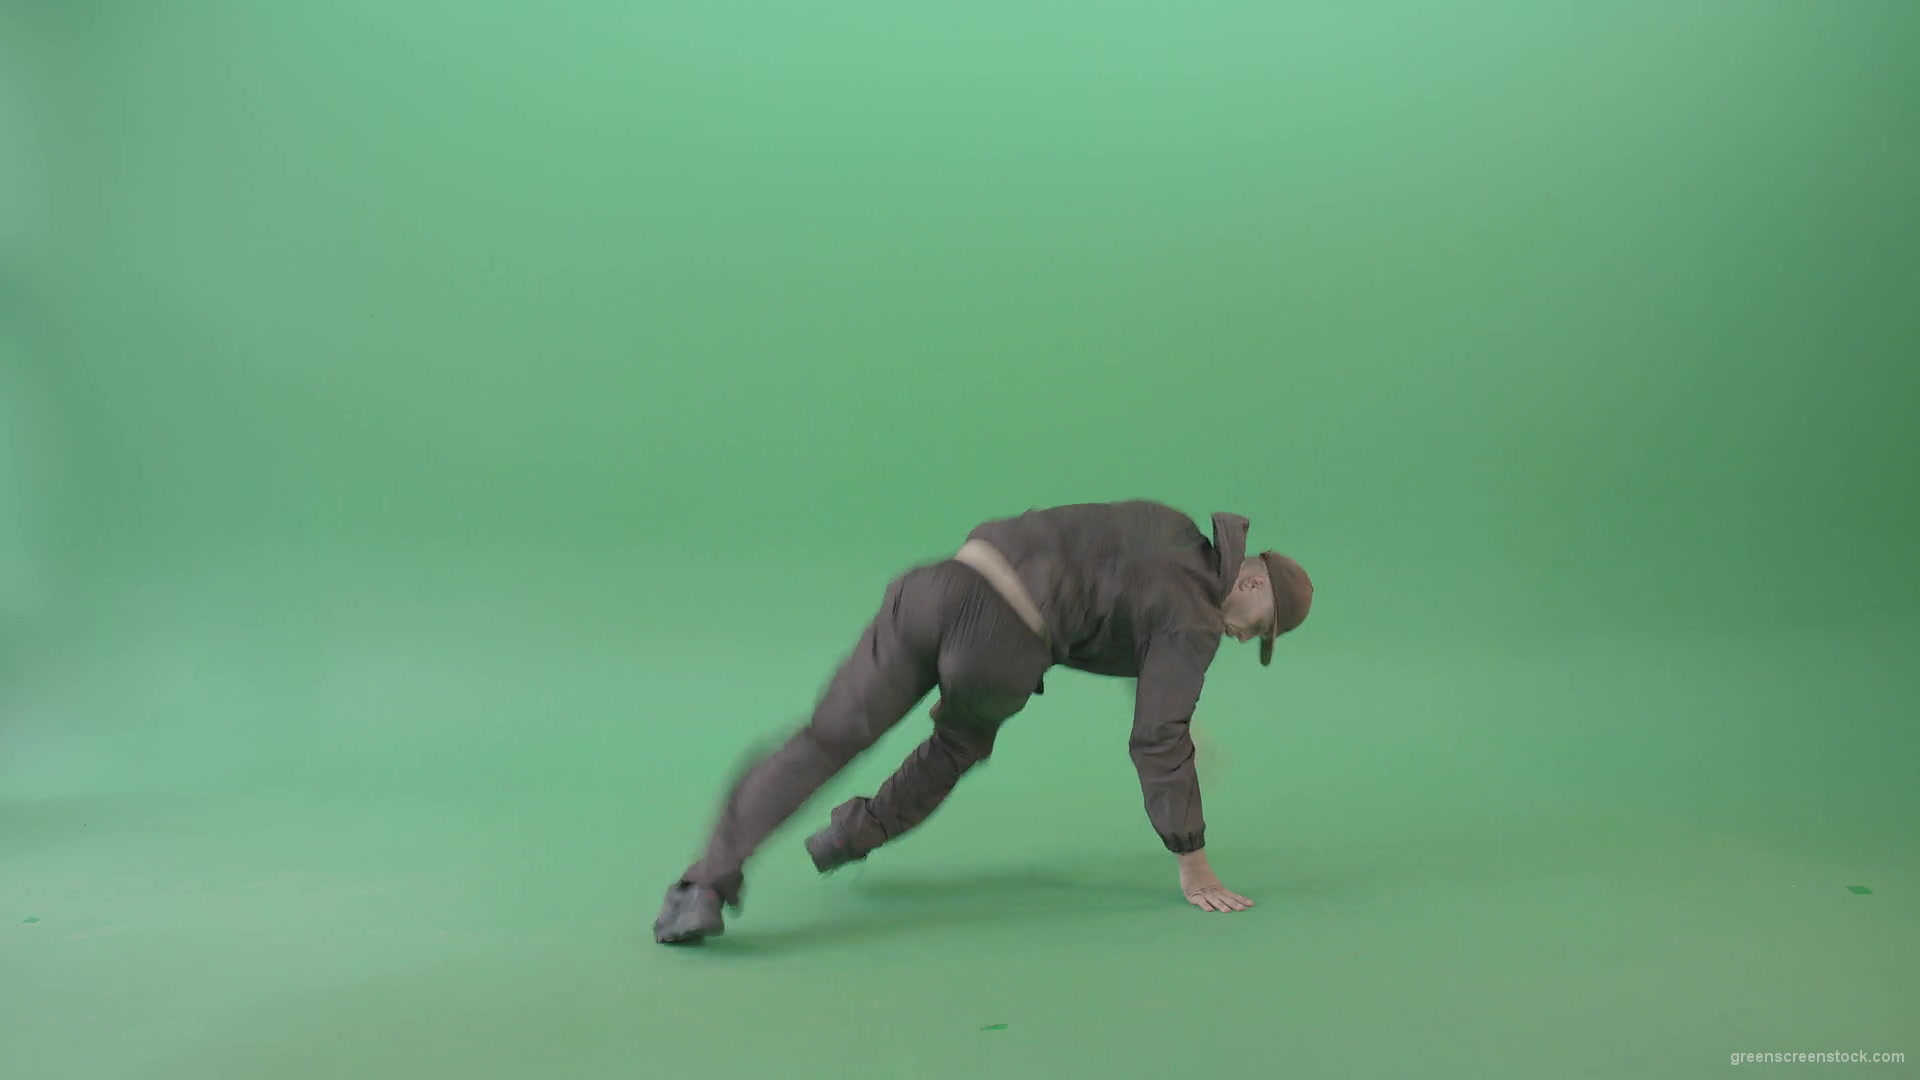 B-Boy-making-gymnastic-break-dance-for-advertising-isolated-on-green-screen-4K-Video-Footage-1920_006 Green Screen Stock